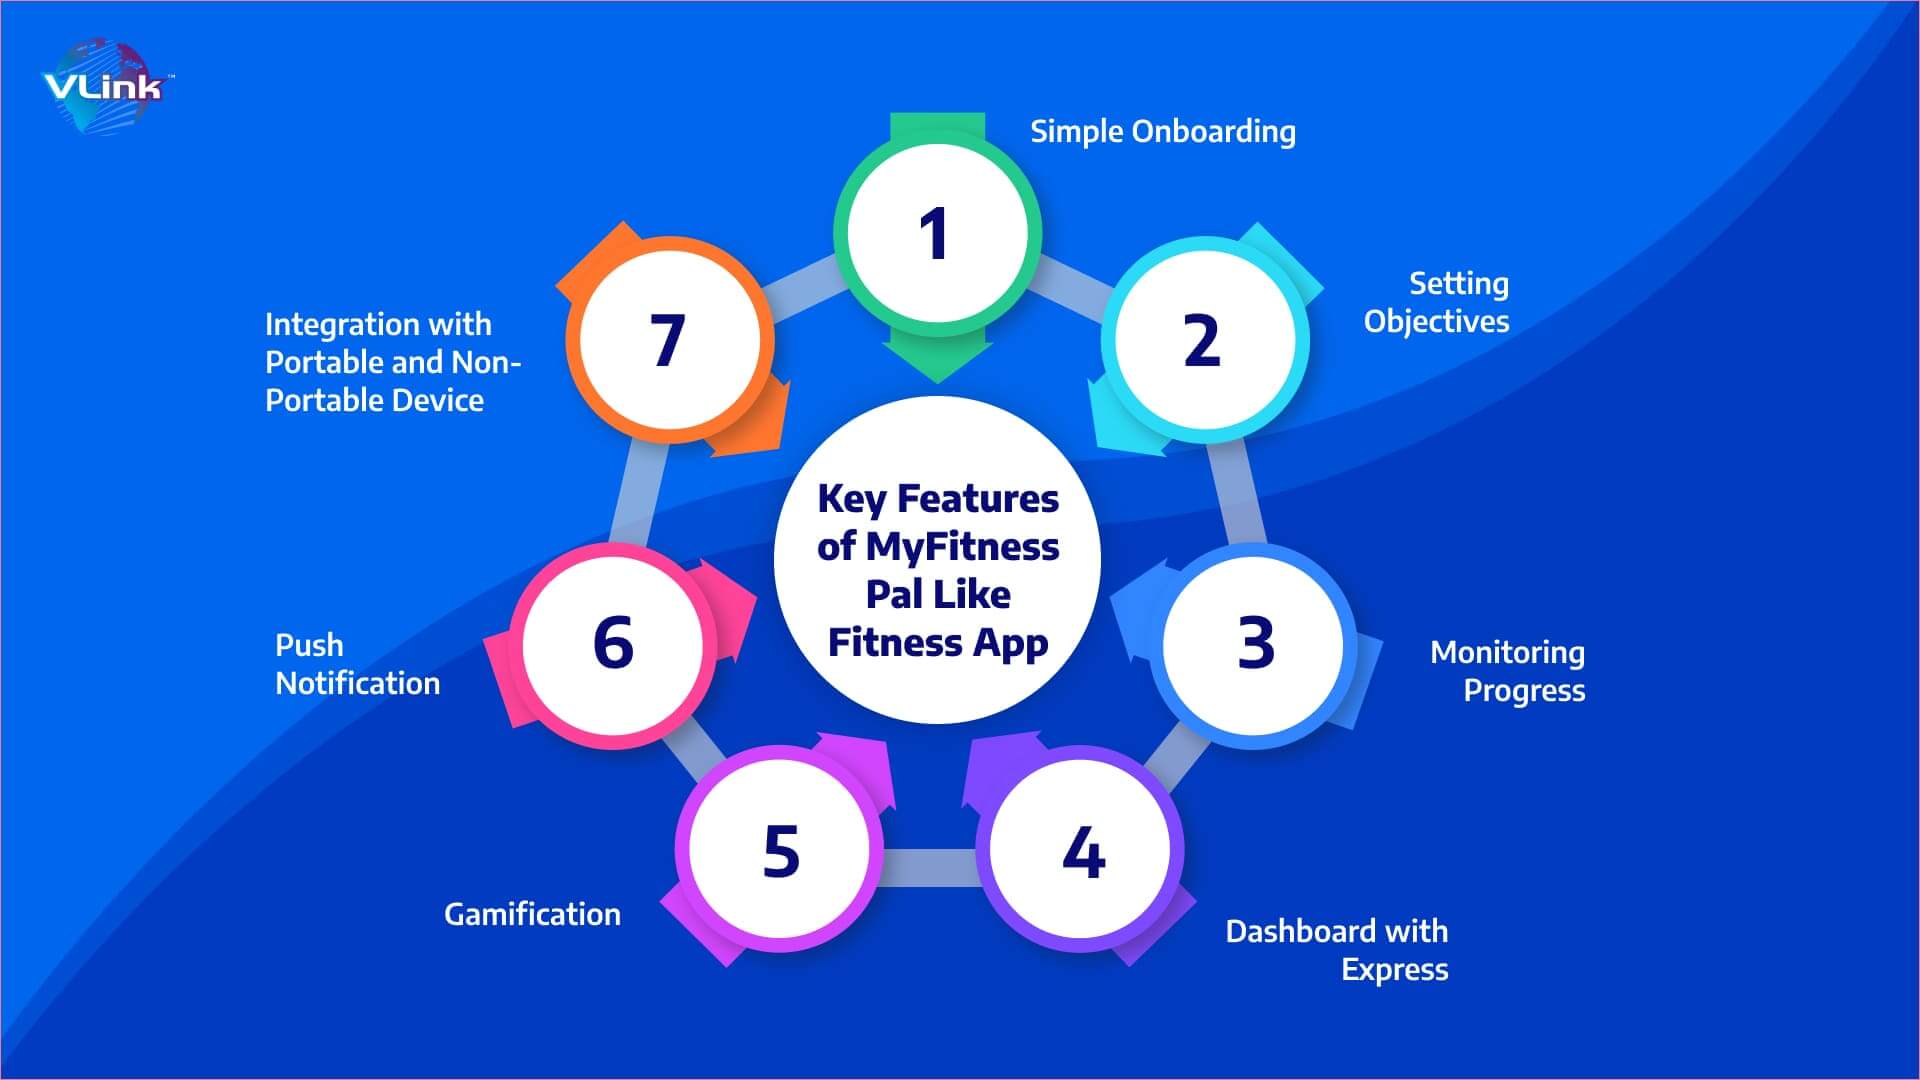 Must-Have Features of MyFitnessPal Like Fitness App